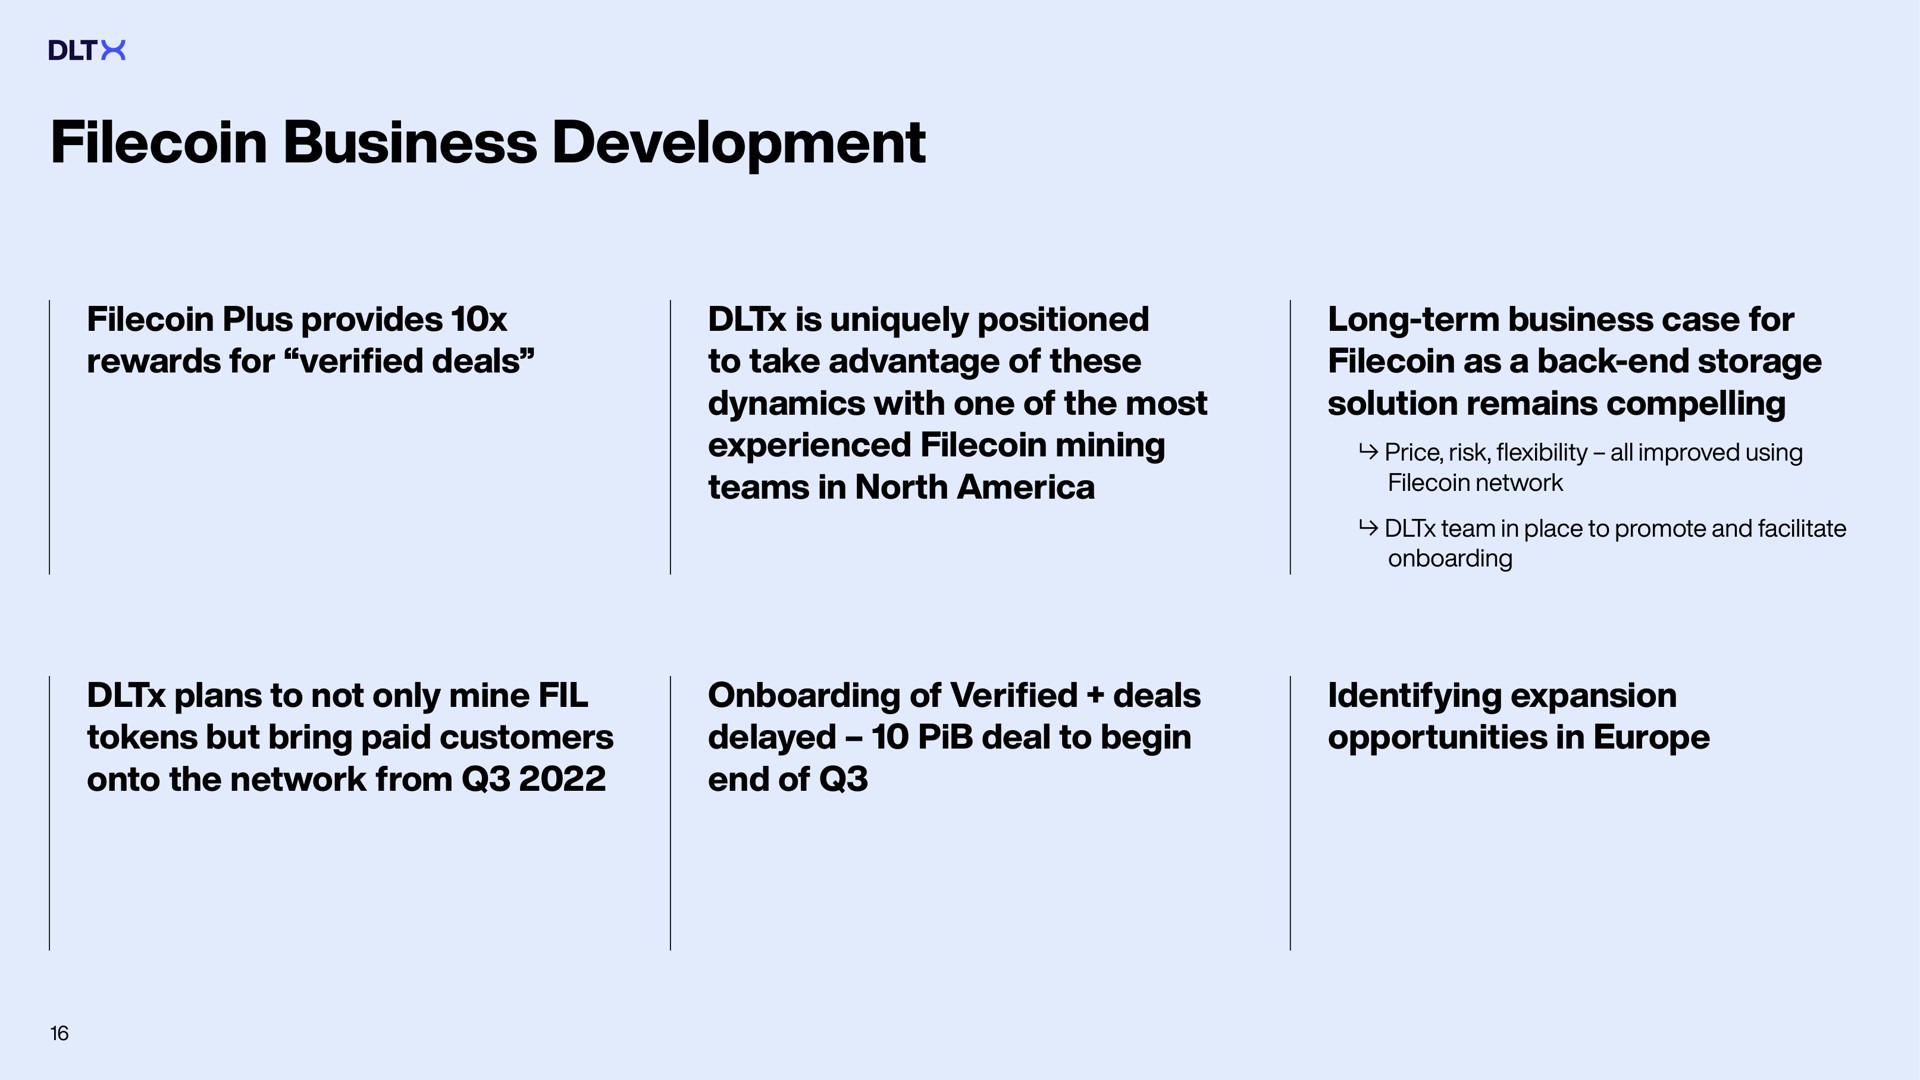 business development plus provides rewards for verified deals is uniquely positioned to take advantage of these dynamics with one of the most experienced mining teams in north long term case for as a back end storage solution remains compelling price risk flexibility all improved using network team in place to promote and facilitate plans to not only mine tokens but bring paid customers onto the network from of verified deals delayed deal to begin end of identifying expansion opportunities in | DLTx